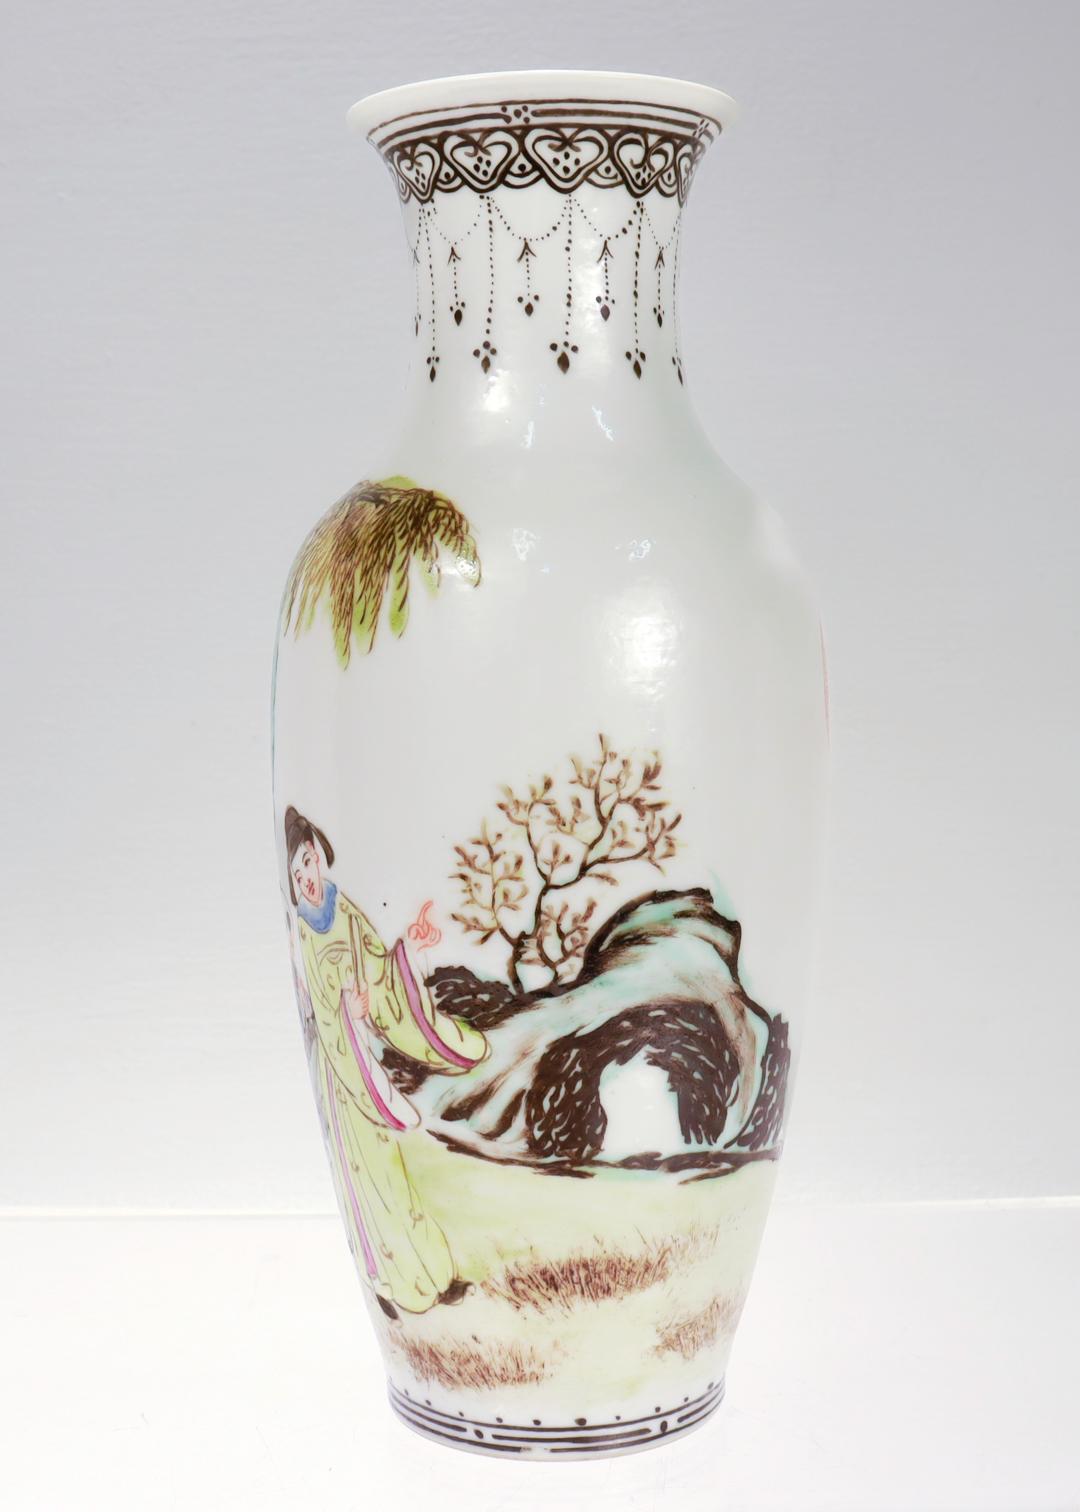 Vintage Chinese Export Eggshell Porcelain Vase In Good Condition For Sale In Philadelphia, PA